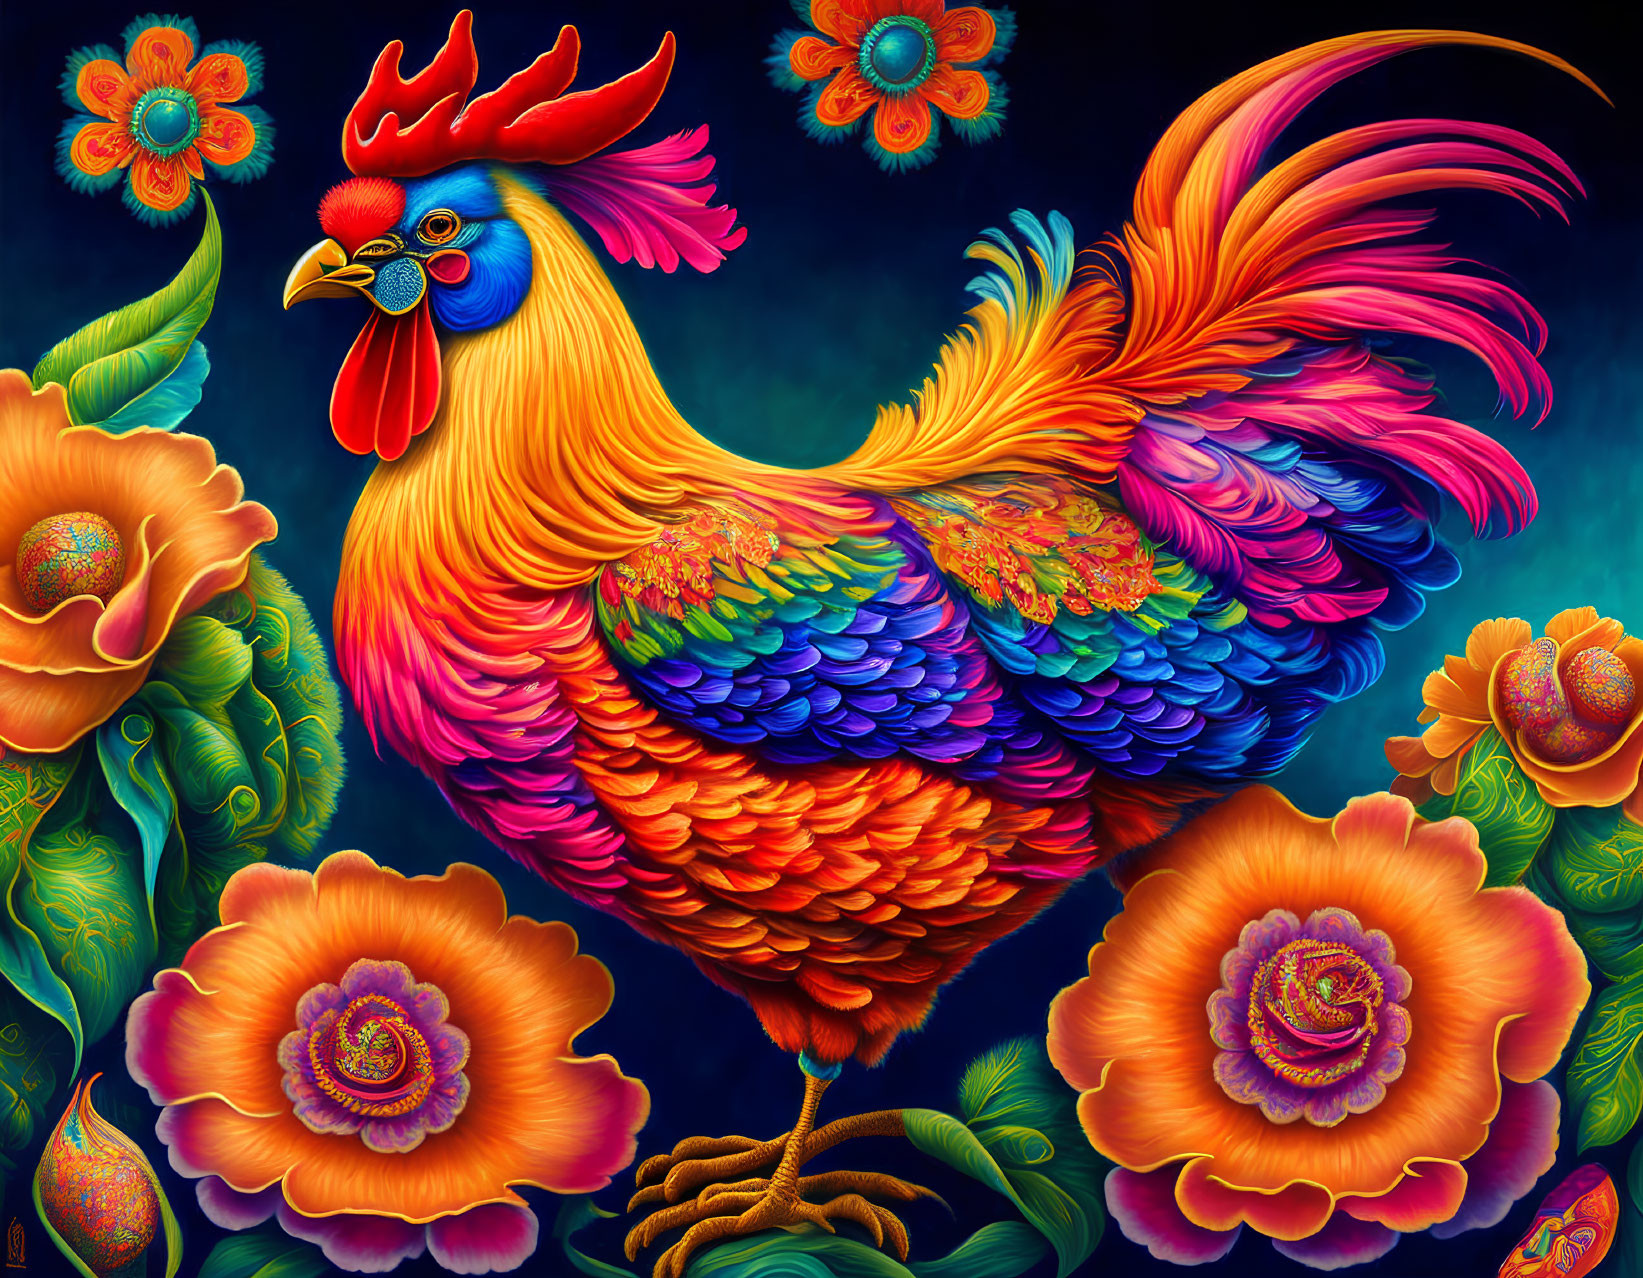 Colorful Rooster Artwork with Orange Flowers on Blue Background